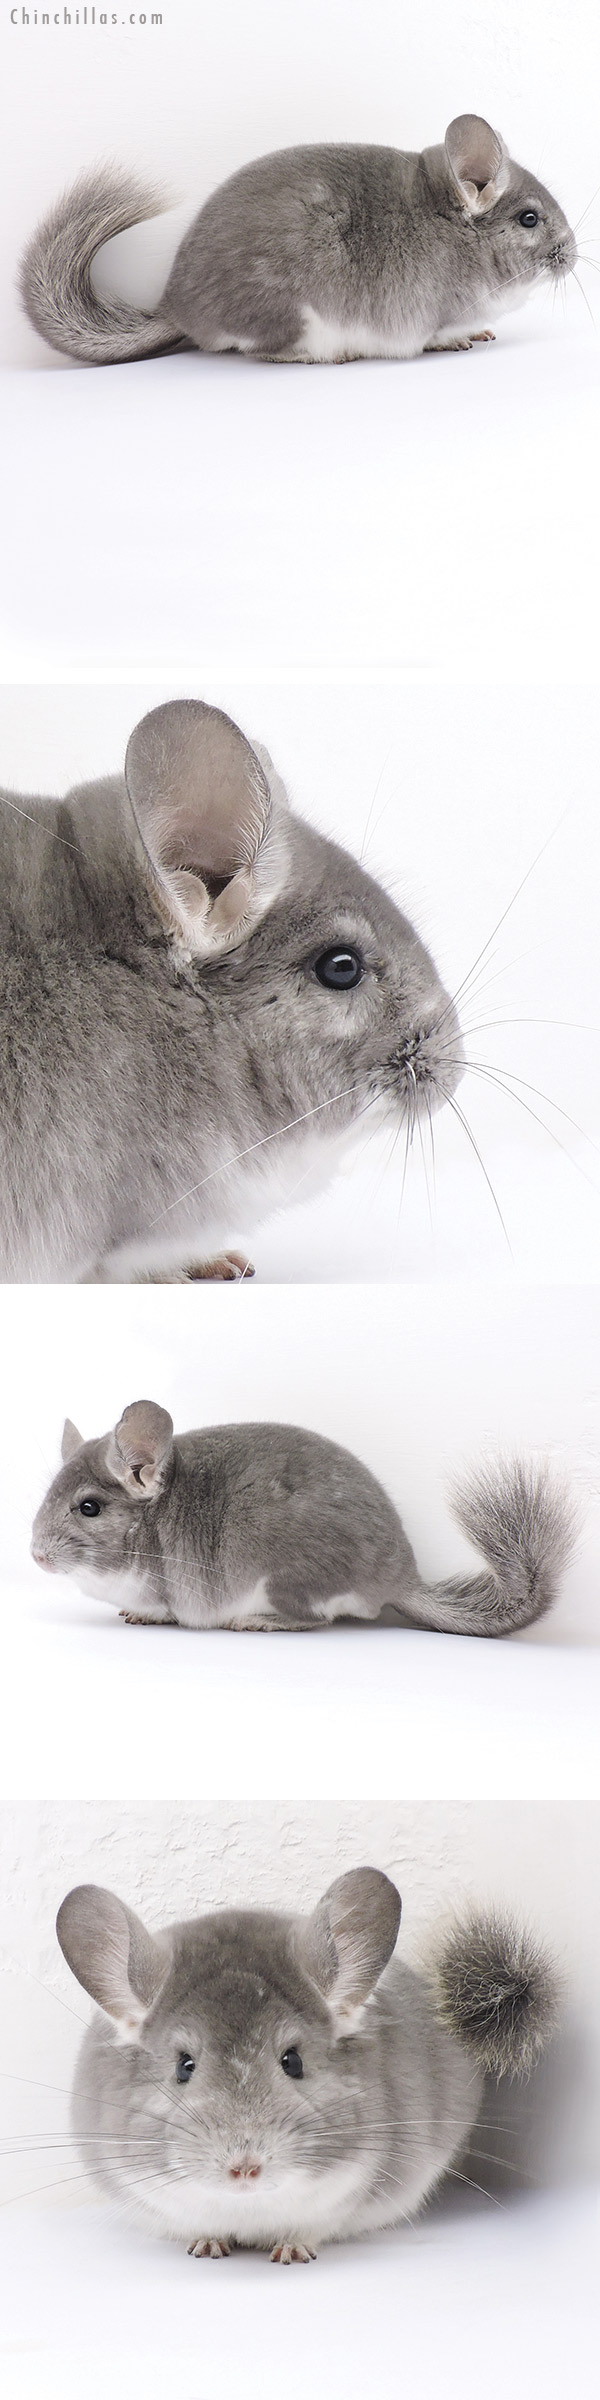 Chinchilla or related item offered for sale or export on Chinchillas.com - 16330 Violet Fading White Male Chinchilla